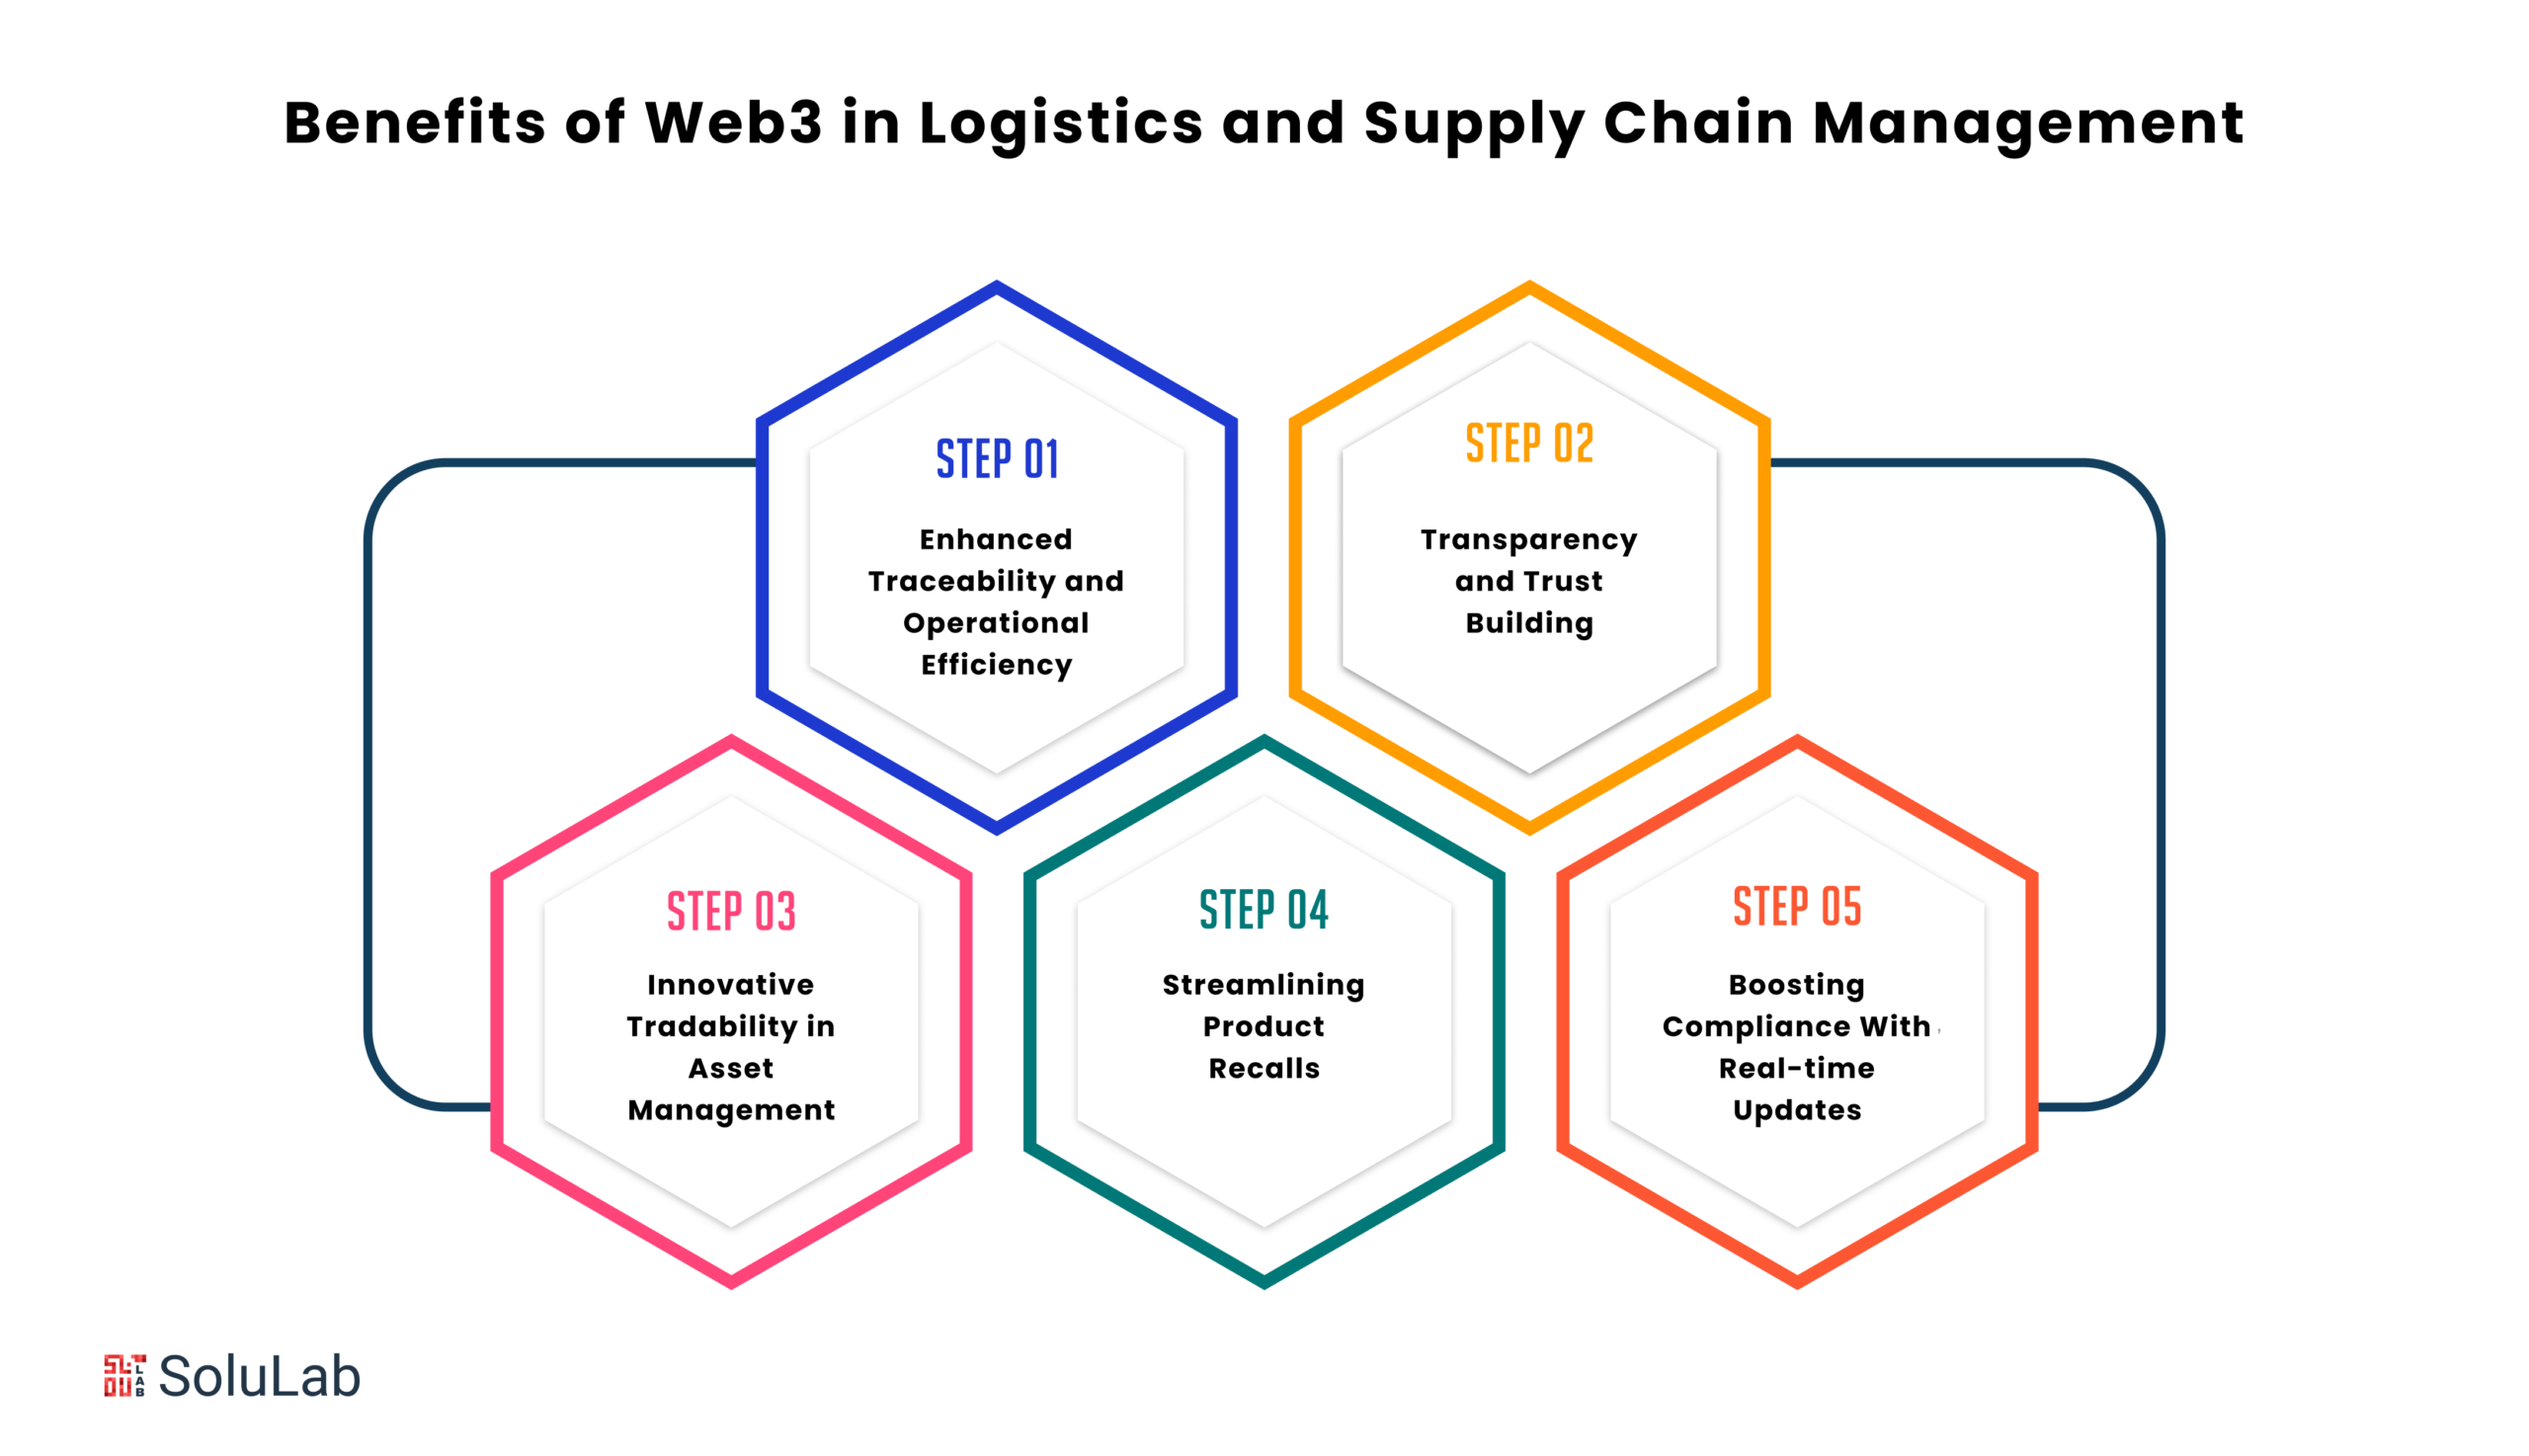 Benefits of Web3 in Logistics and Supply Chain Management